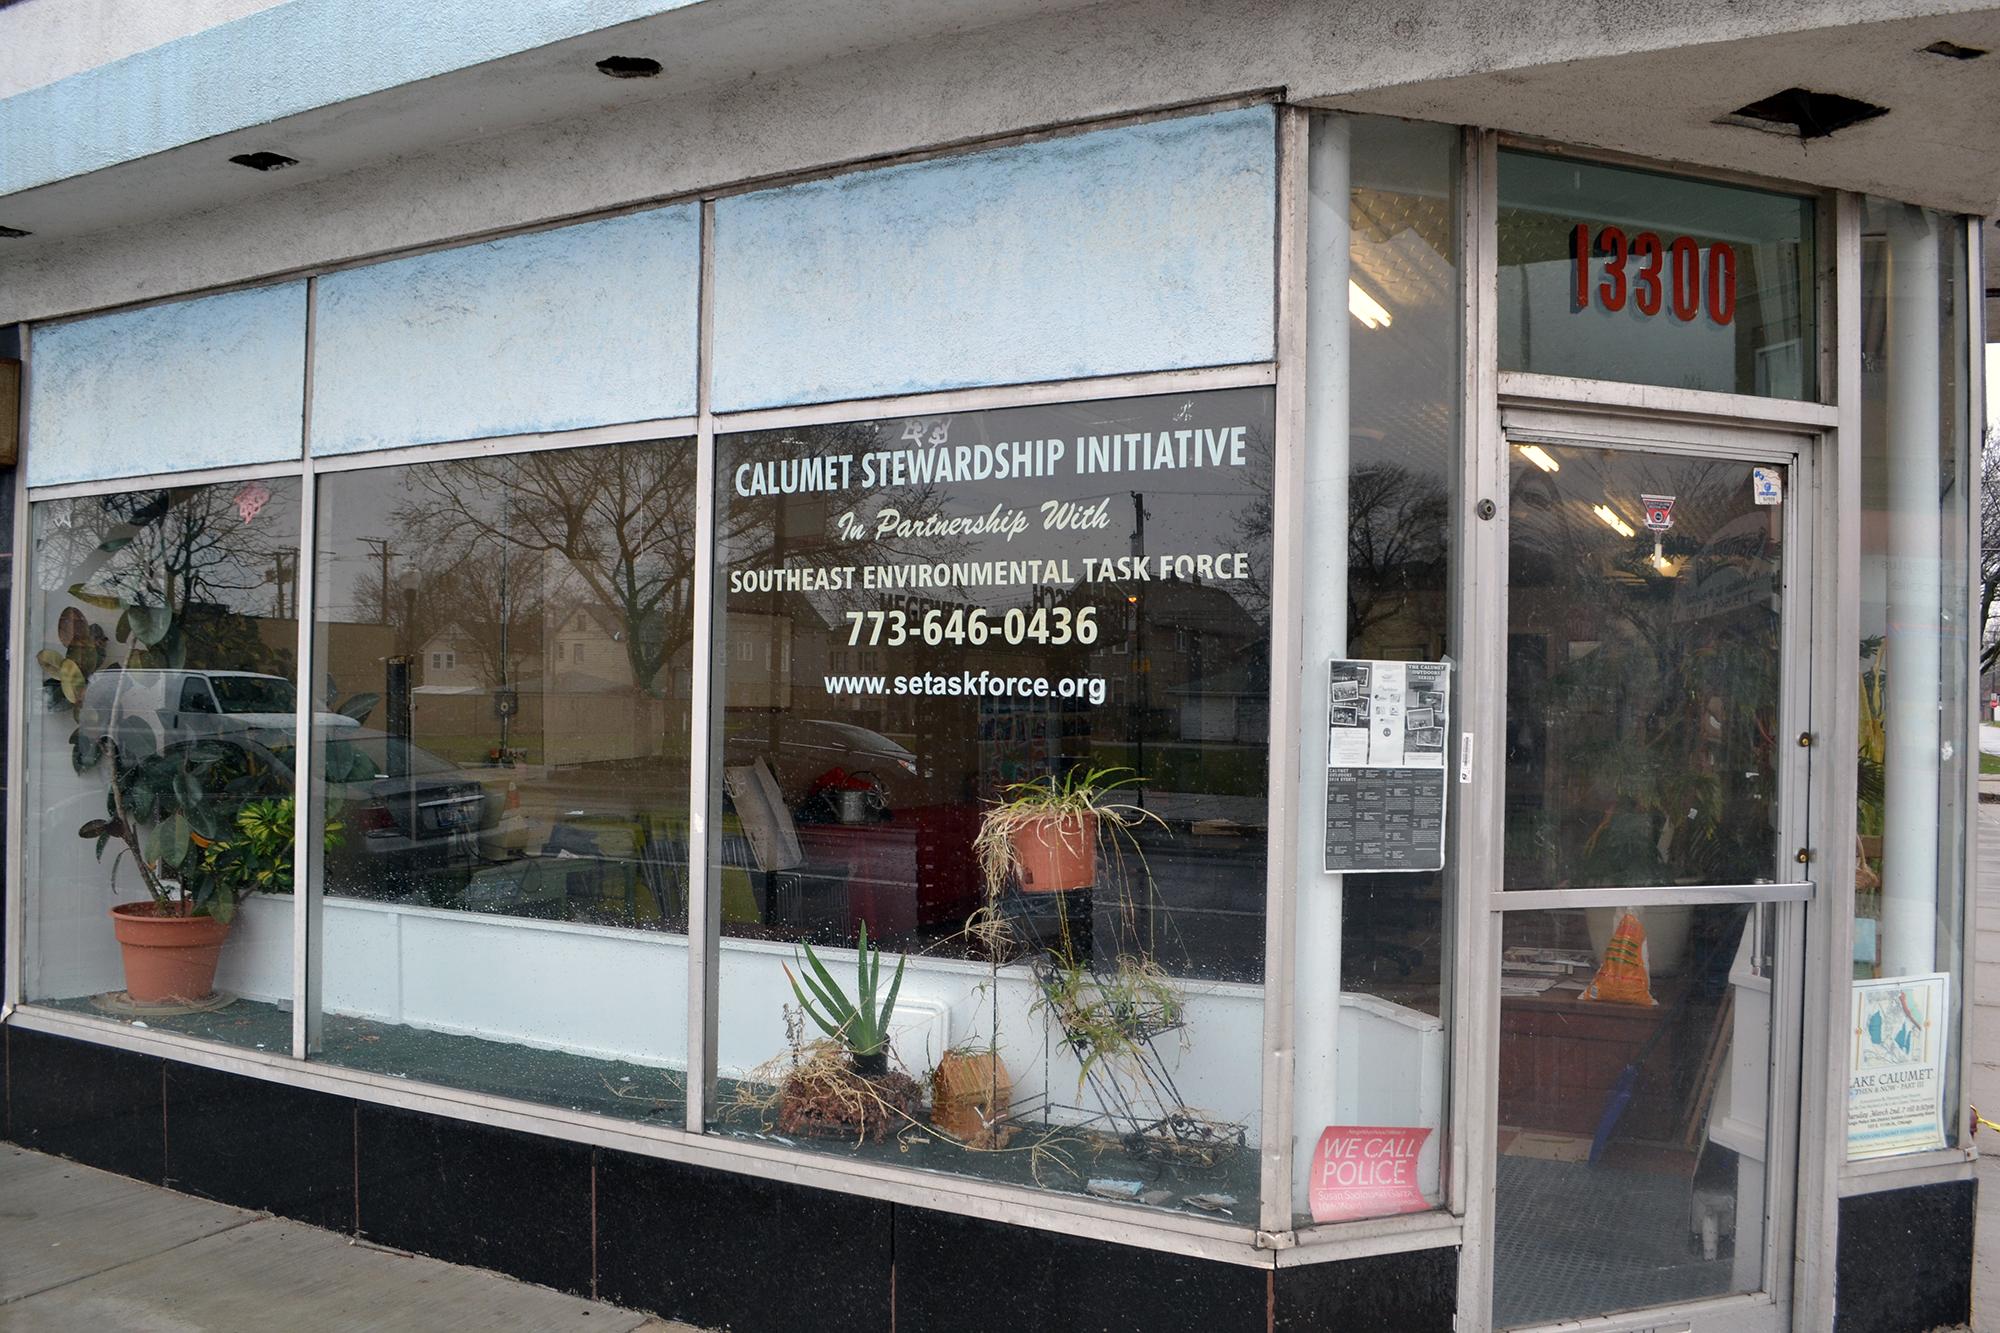 Southeast Environmental Task Force's office in Chicago's Hegewisch community area. (Alex Ruppenthal / Chicago Tonight)